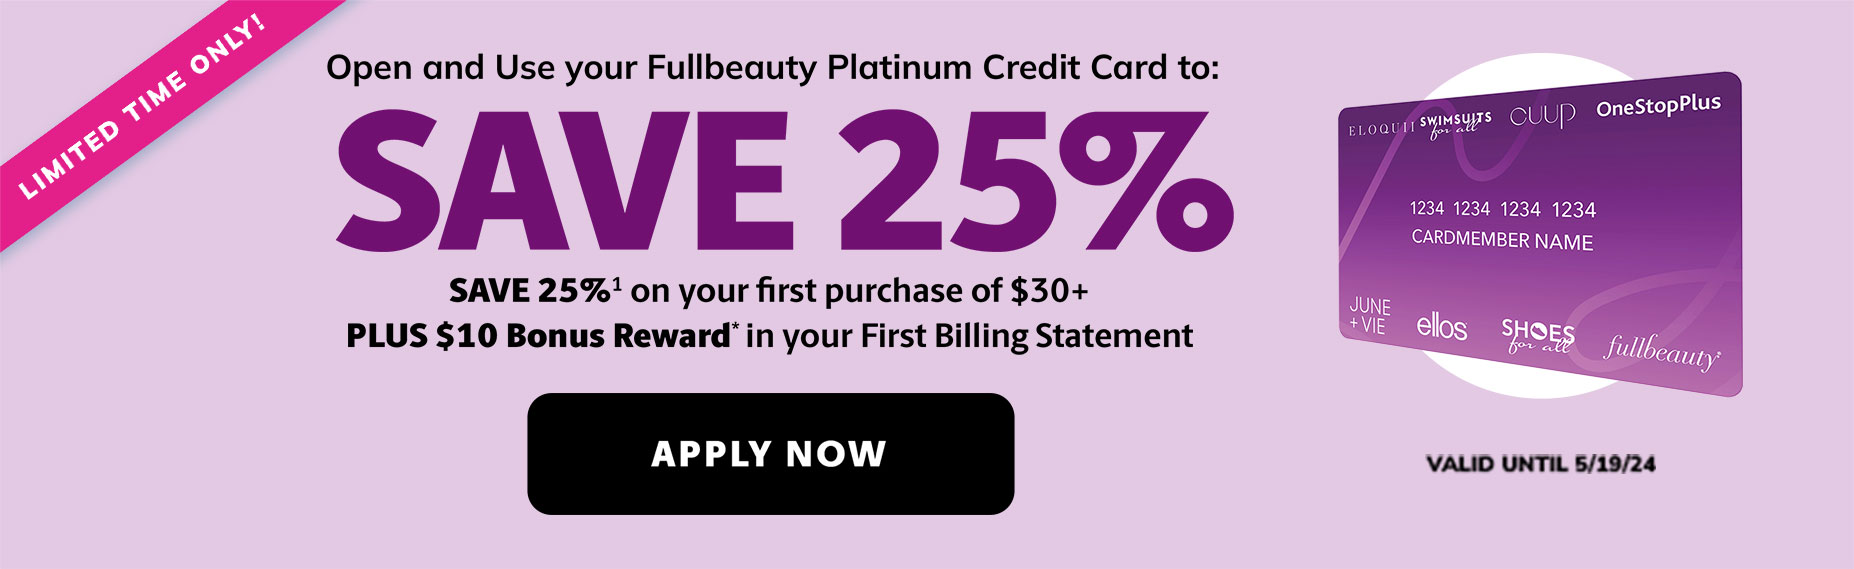 Open and Use your Fullbeauty Platinum Credit Card to Save 25%. Valid until 5/19/24 - Apply Now